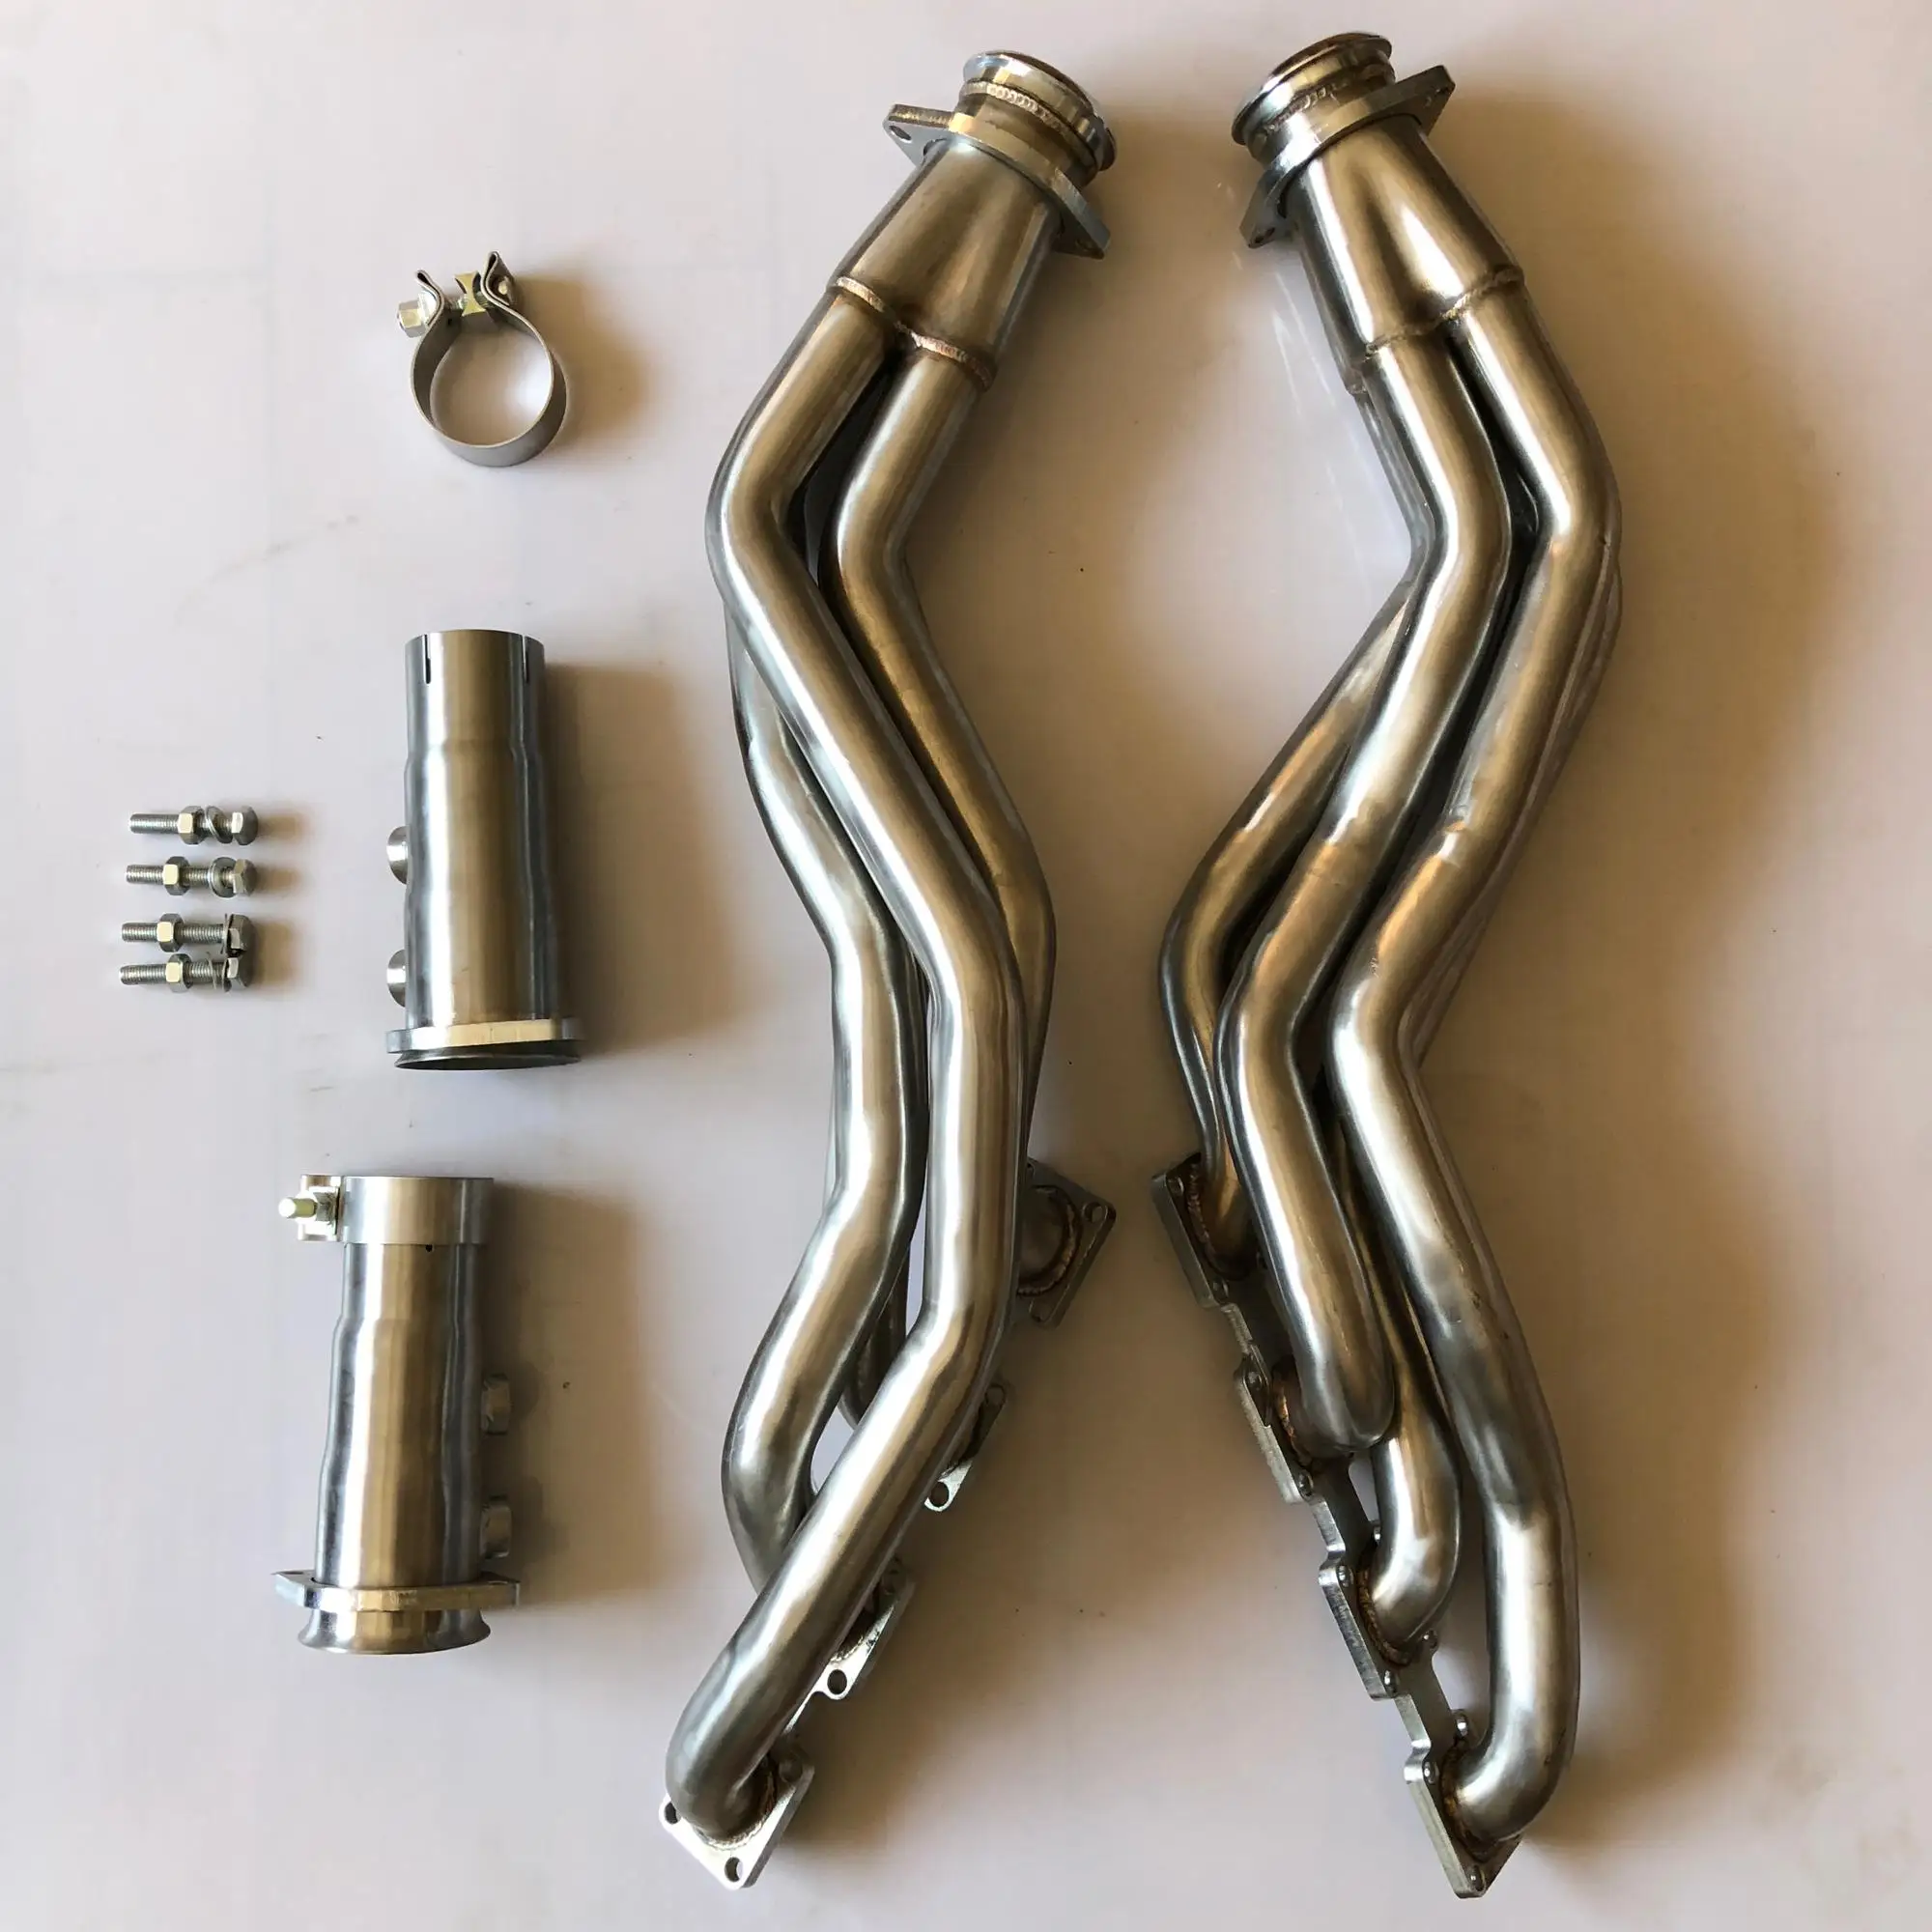 BM Performance Stainless Steel Exhaust Manifold Headers, View EXHAUST